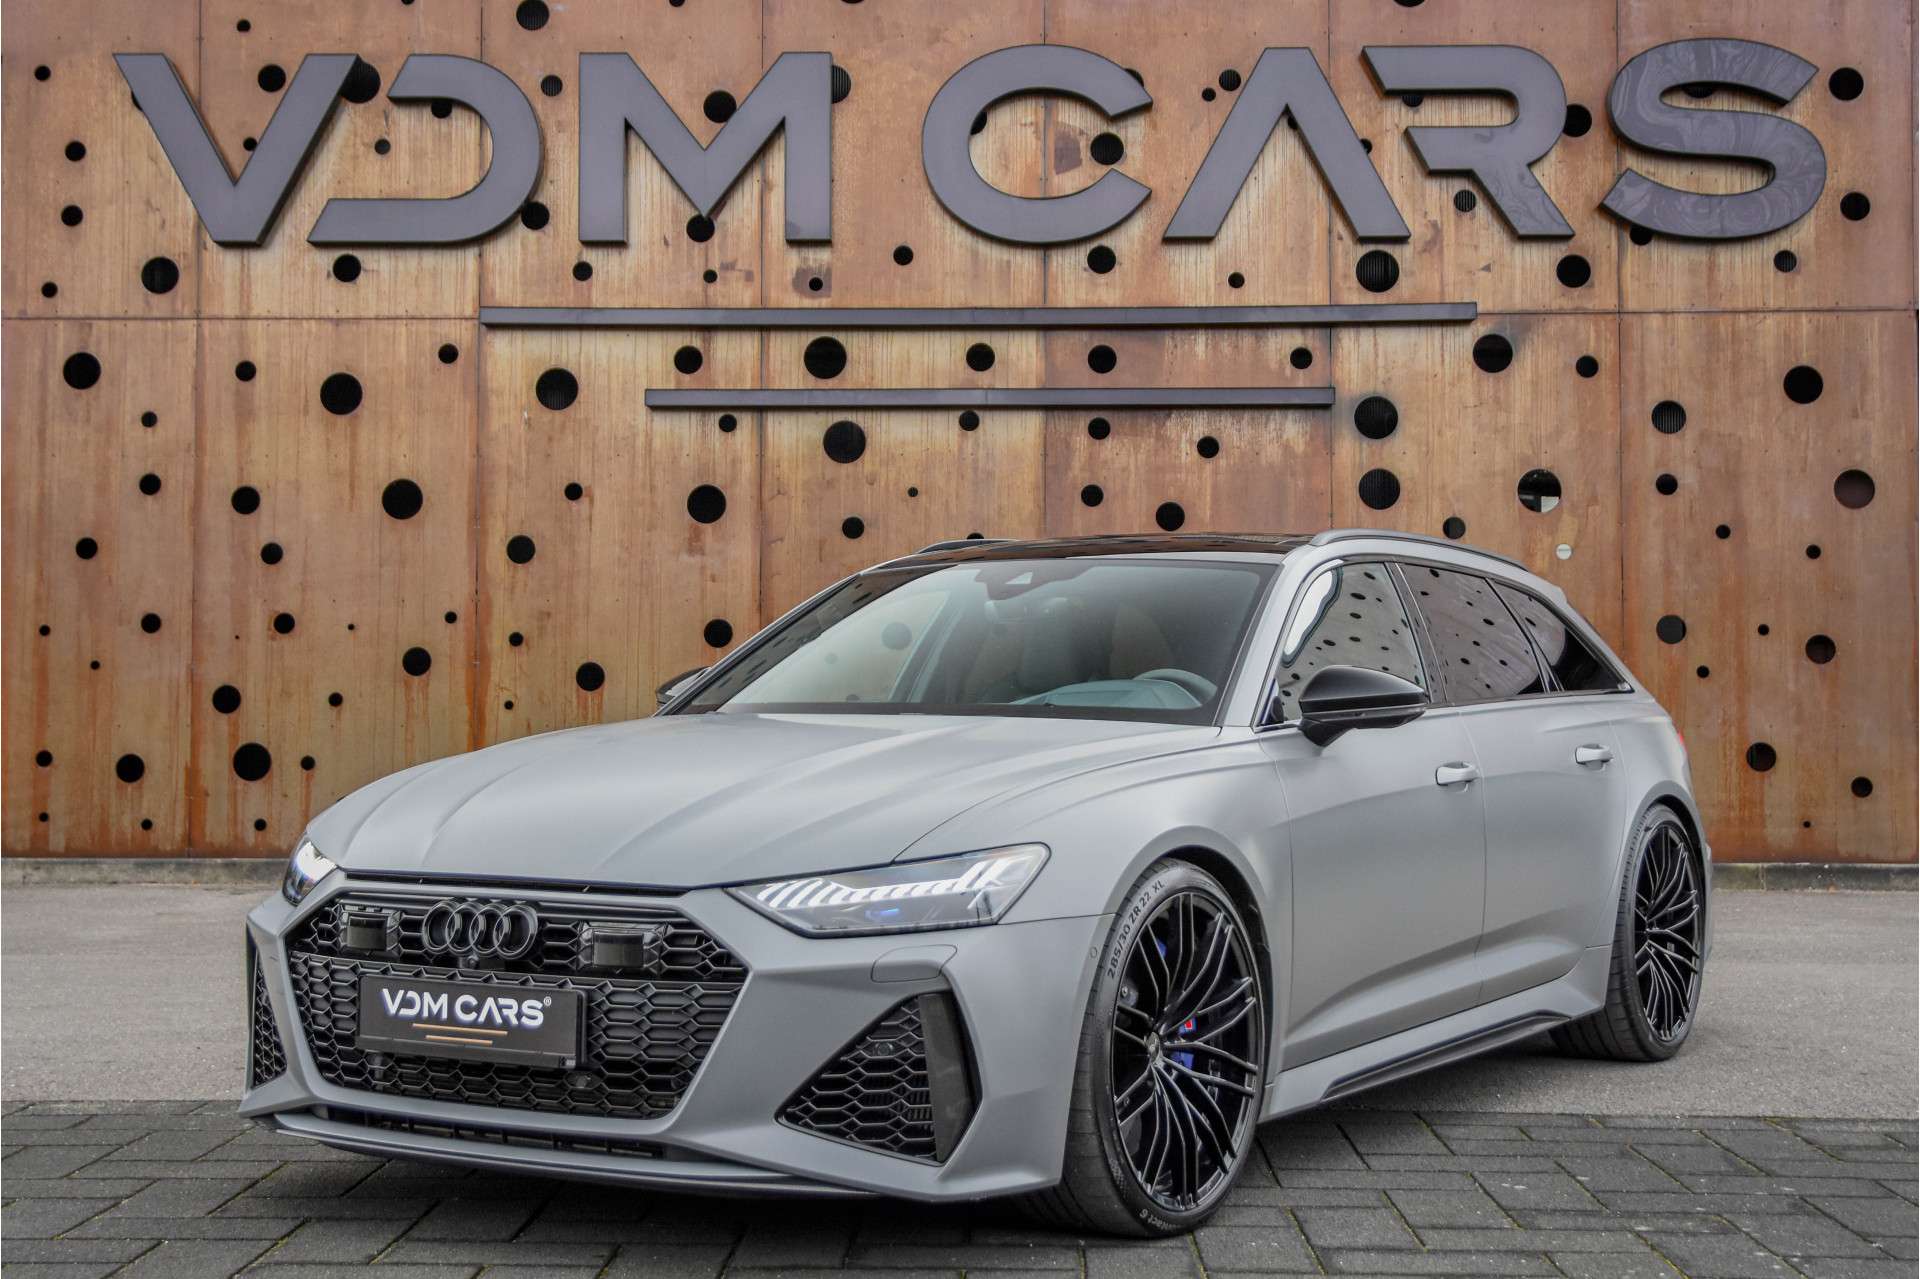 Audi RS6 Station wagon in Grey used in HENGELO for € 192,900.-